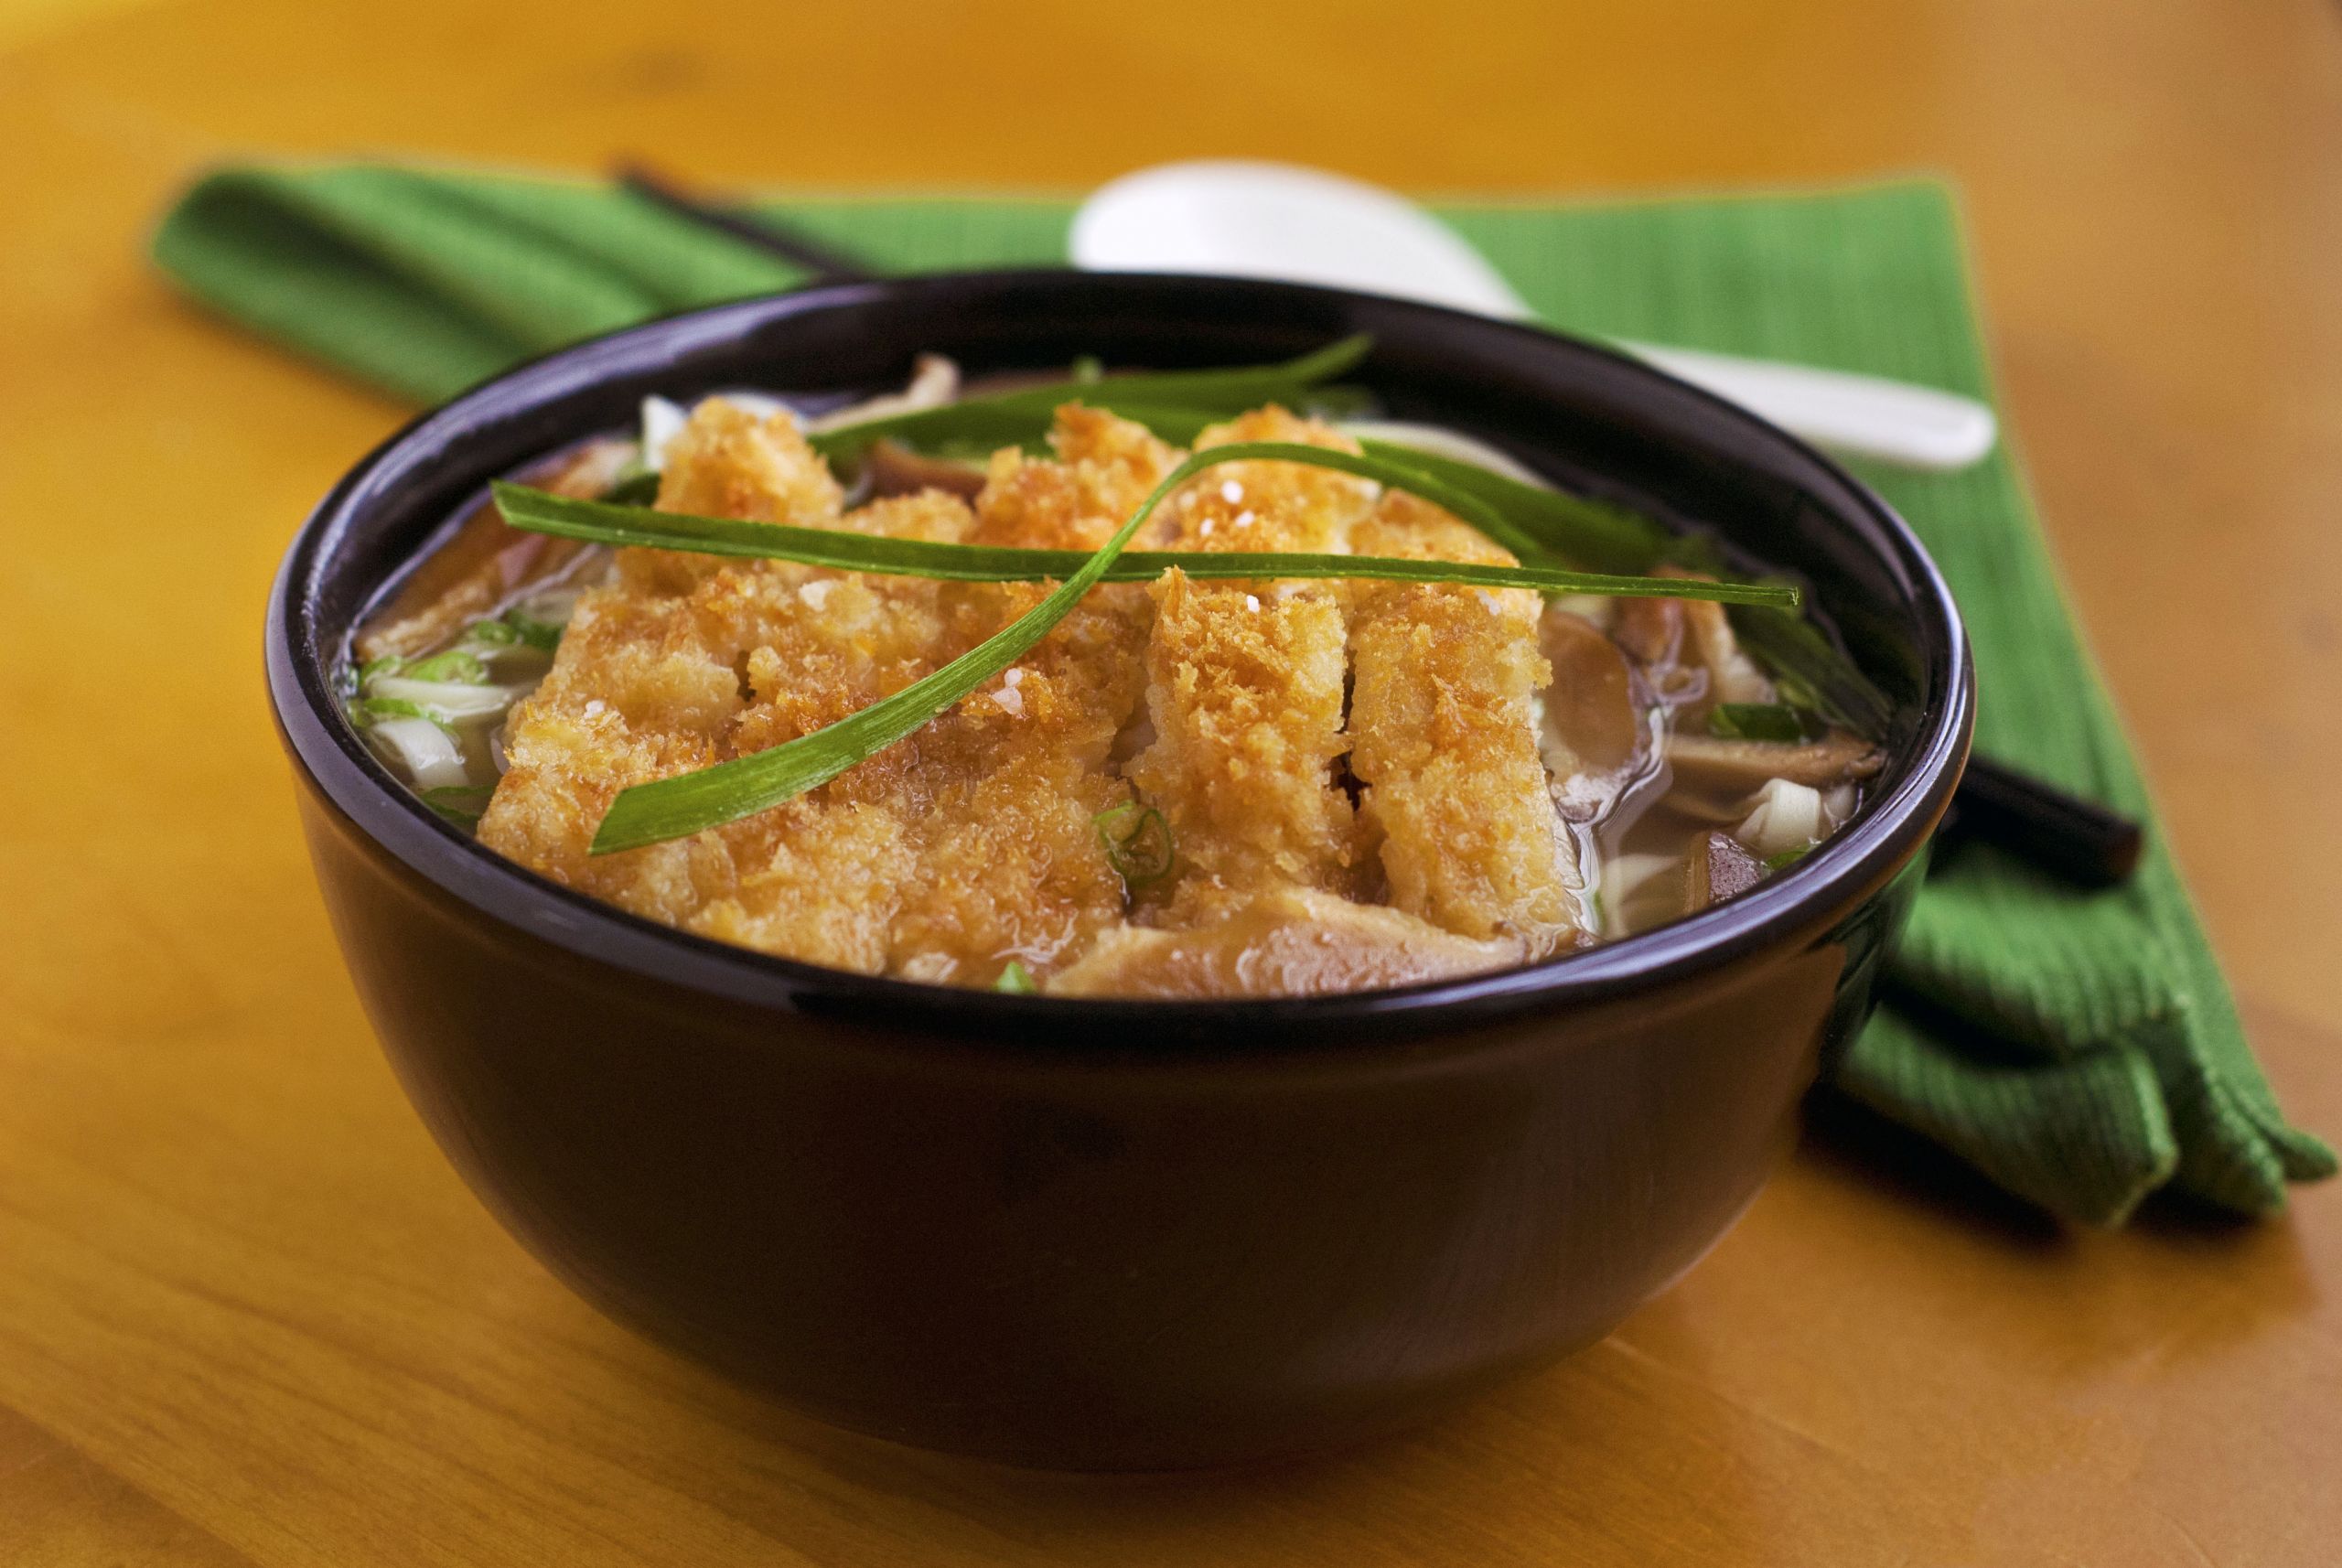 Instant Udon Noodles
 Katsu Chicken Udon and Instant Noodles at the Asian